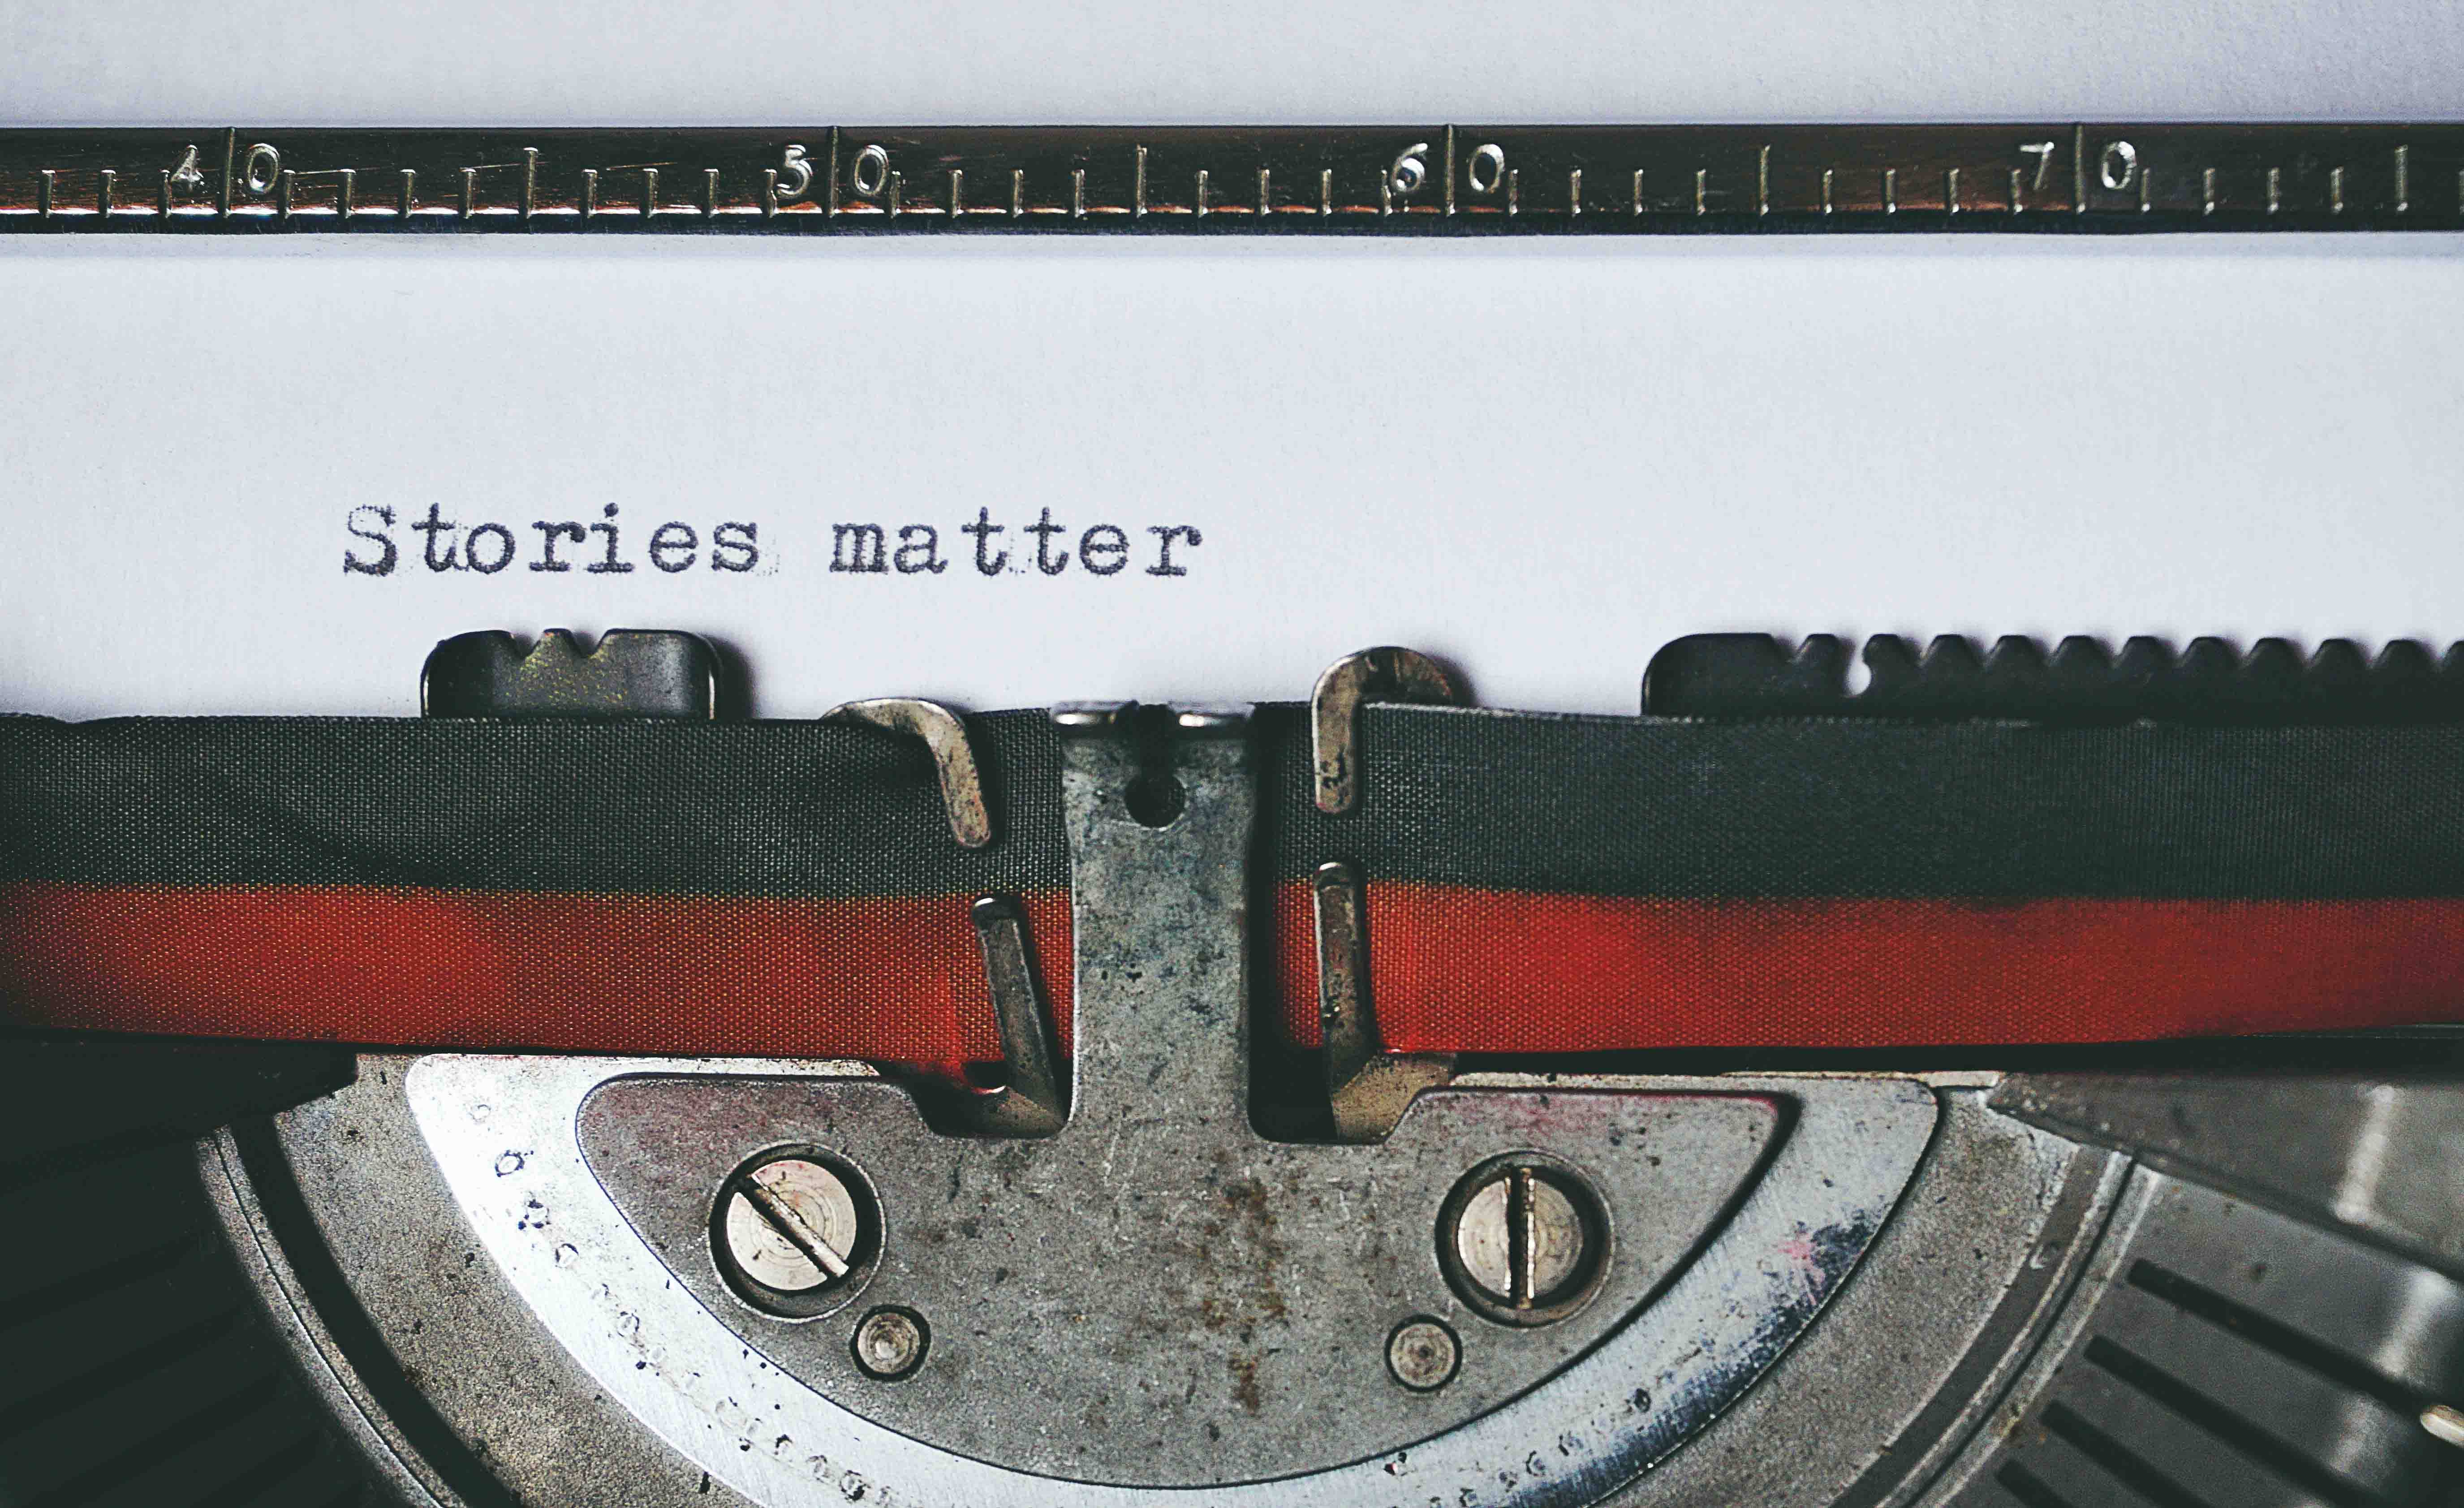 A close-up shot of a paper with Stories matter typewritten on it.